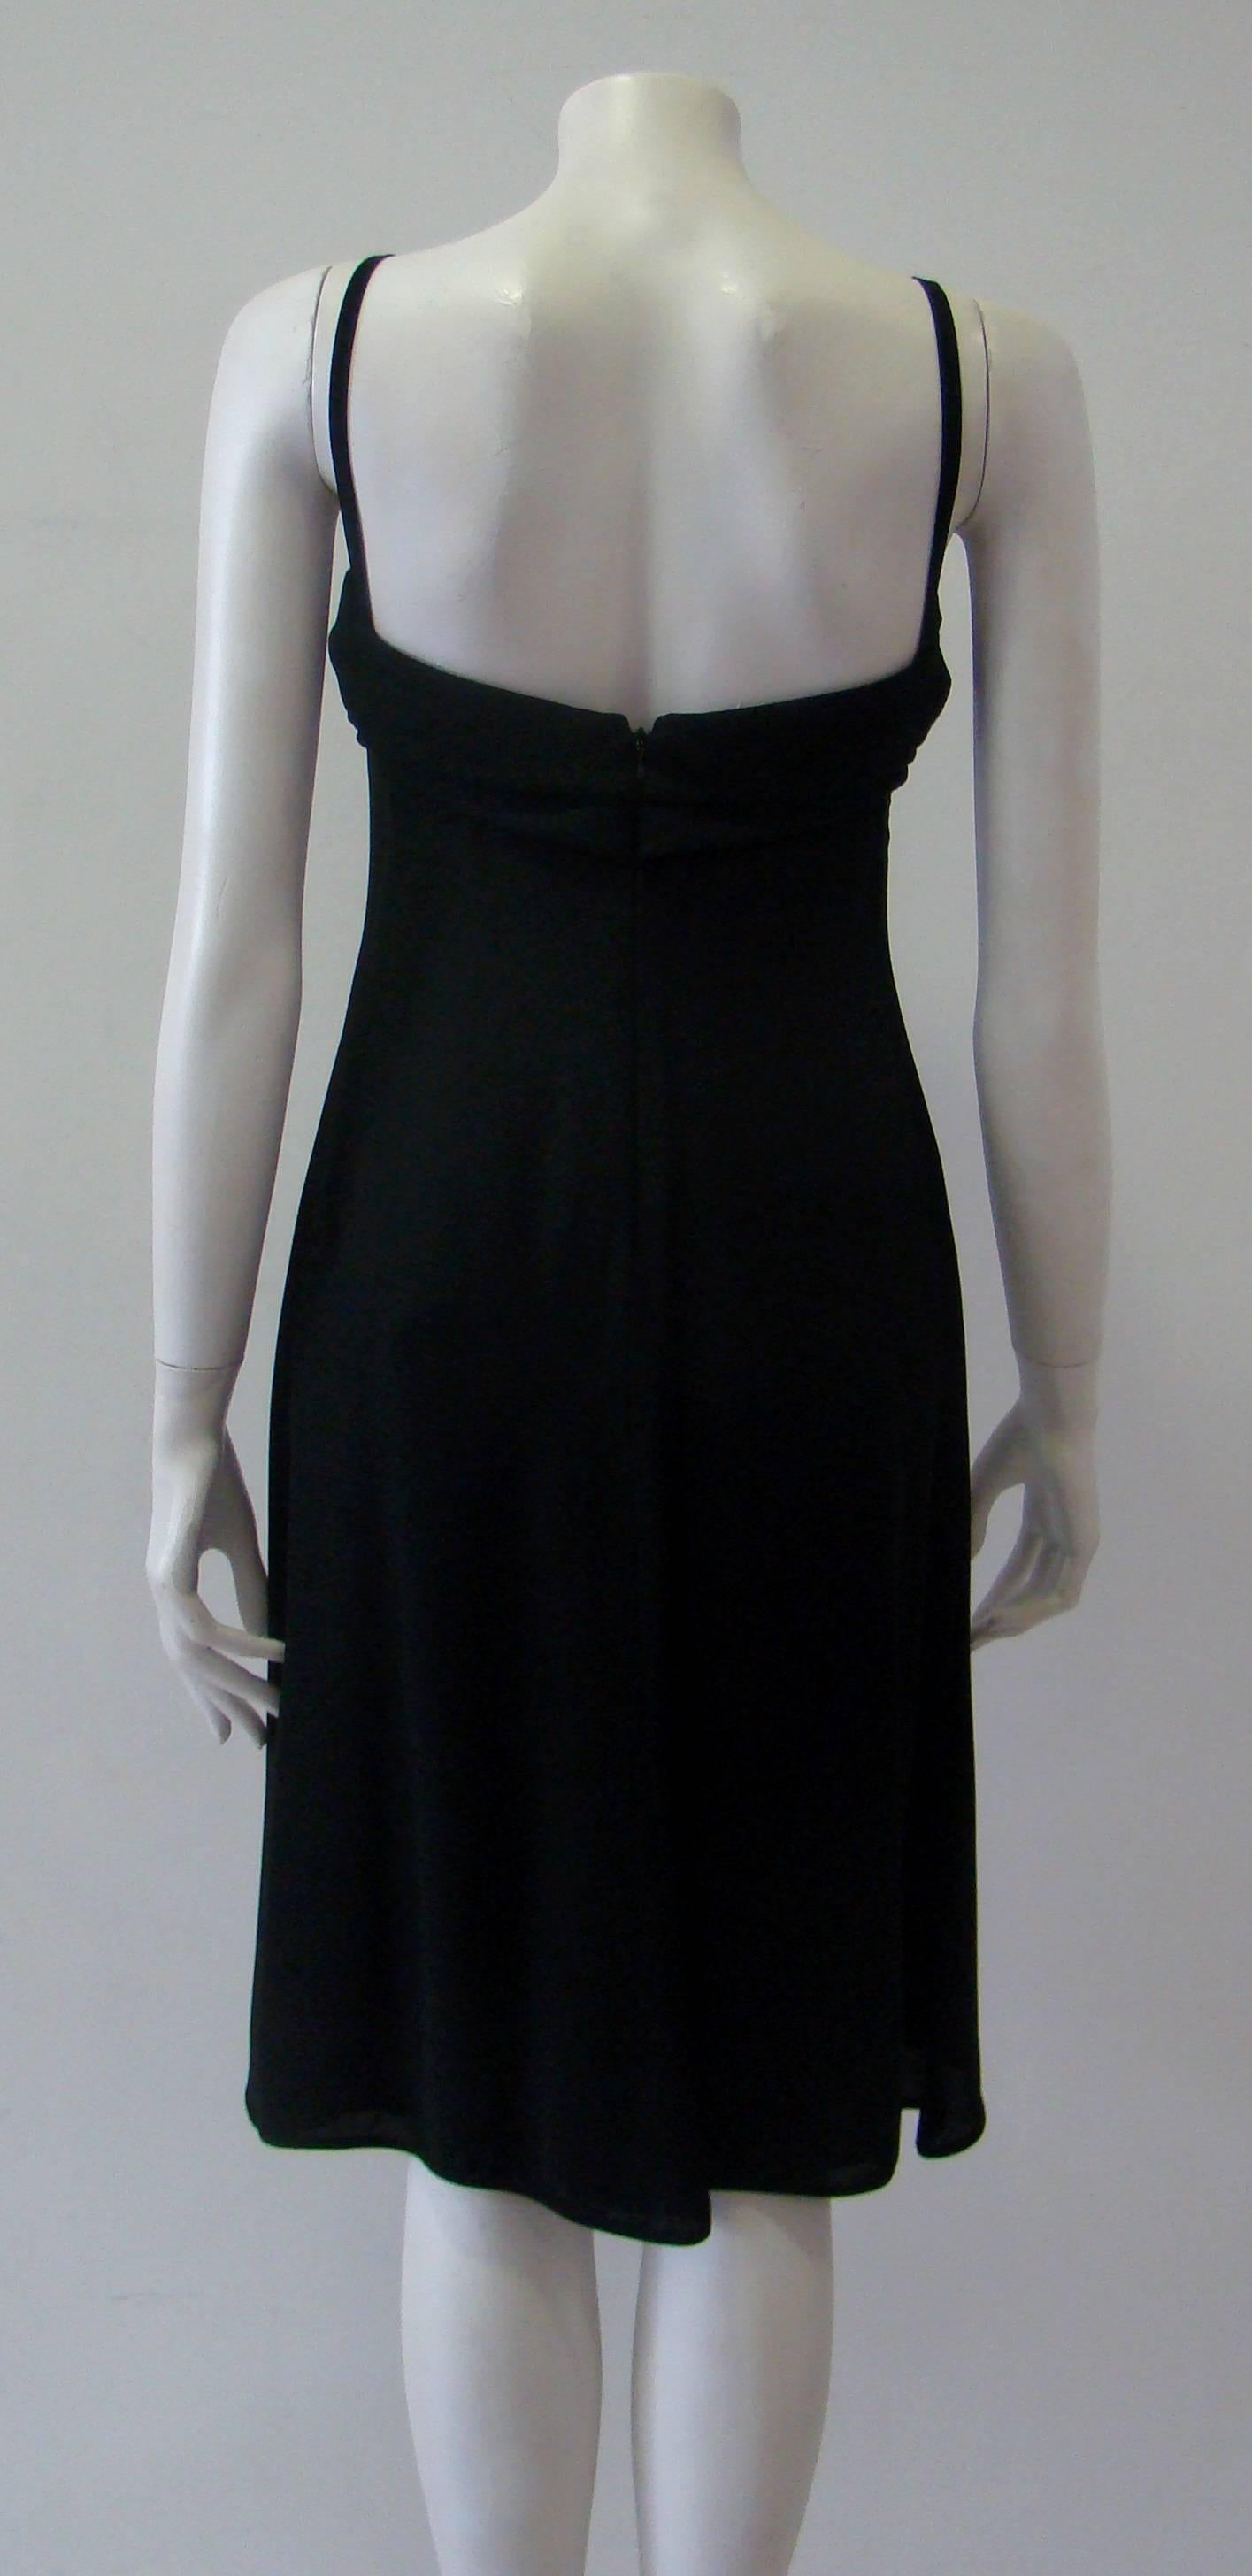 Gianni Versace Couture Front Buttoning Dress Spring 1996 For Sale 2